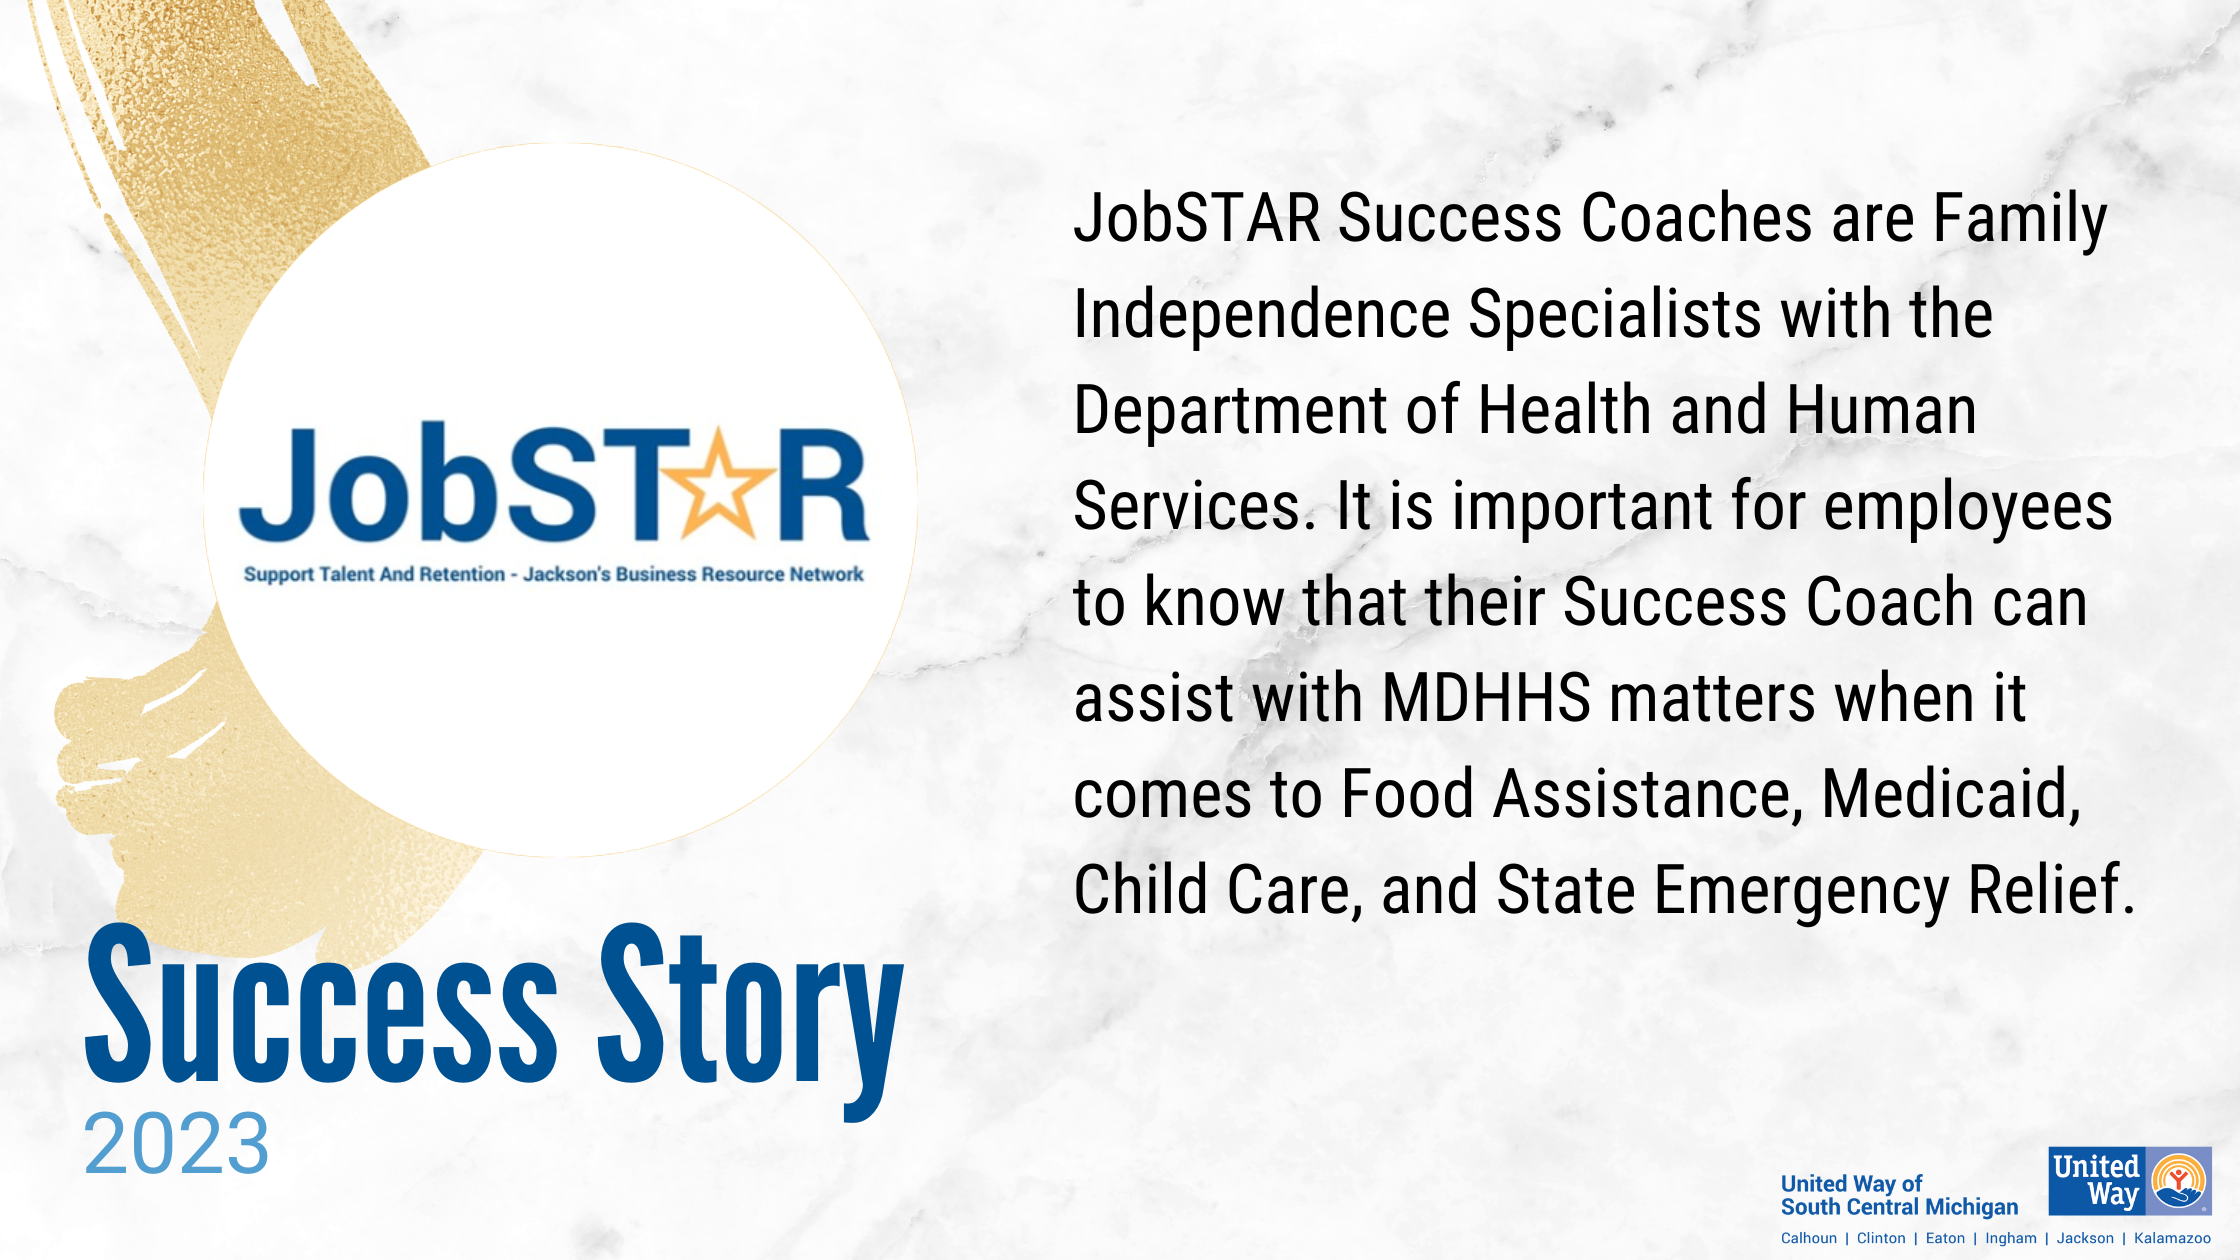 JobSTAR Success Coaches are Family Independence Specialists with the Department of Health and Human Services. It is important for employees to know that their Success Coach can assist with MDHHS m (2)